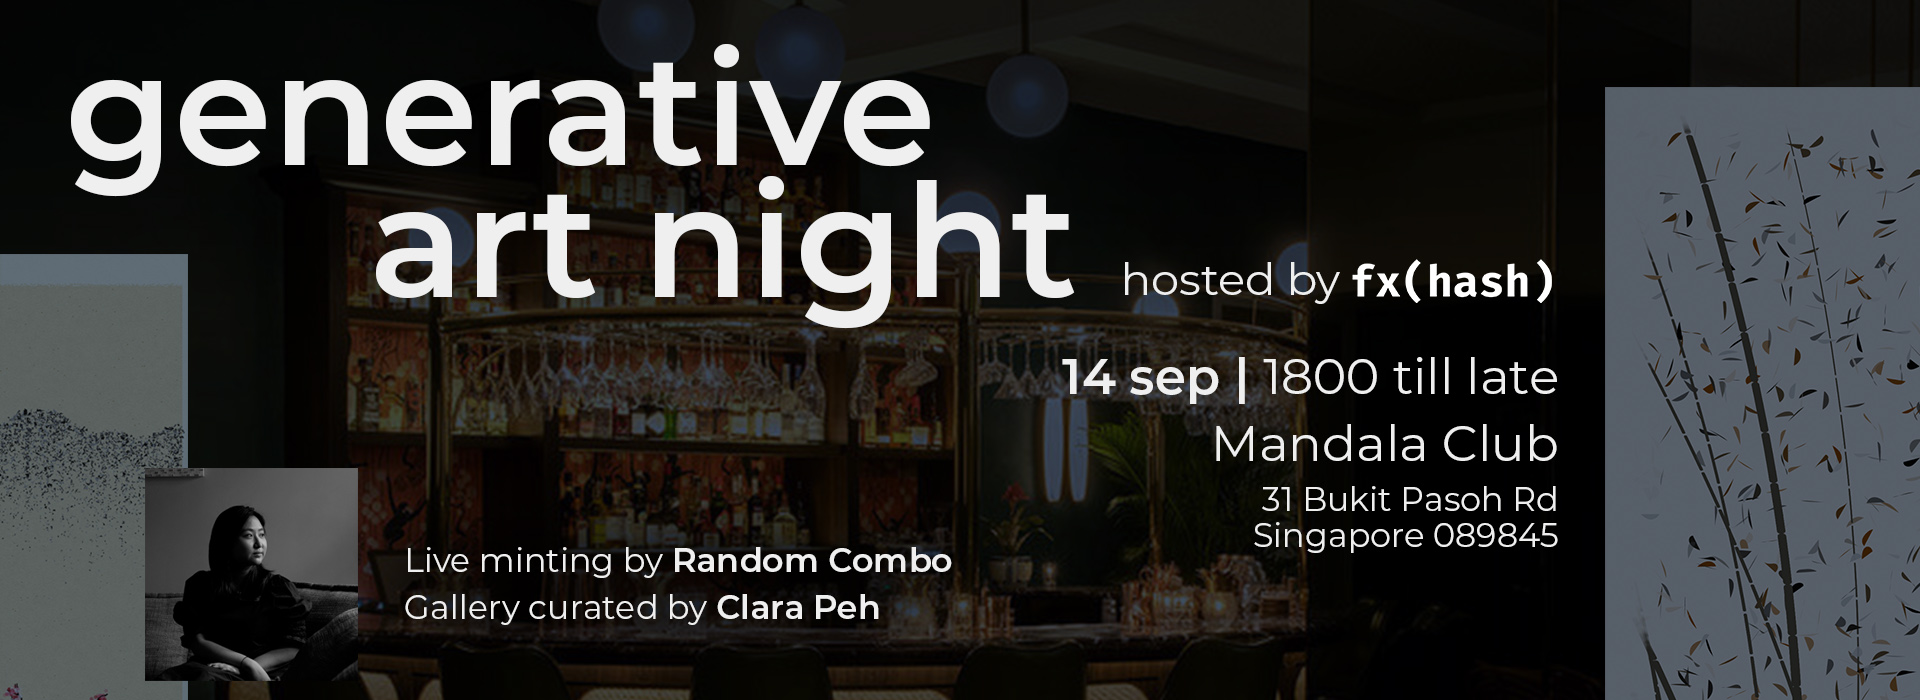 Generative Art Night, hosted by fxhash in collaboration with Tezos, TZ APAC, and Mandala Club